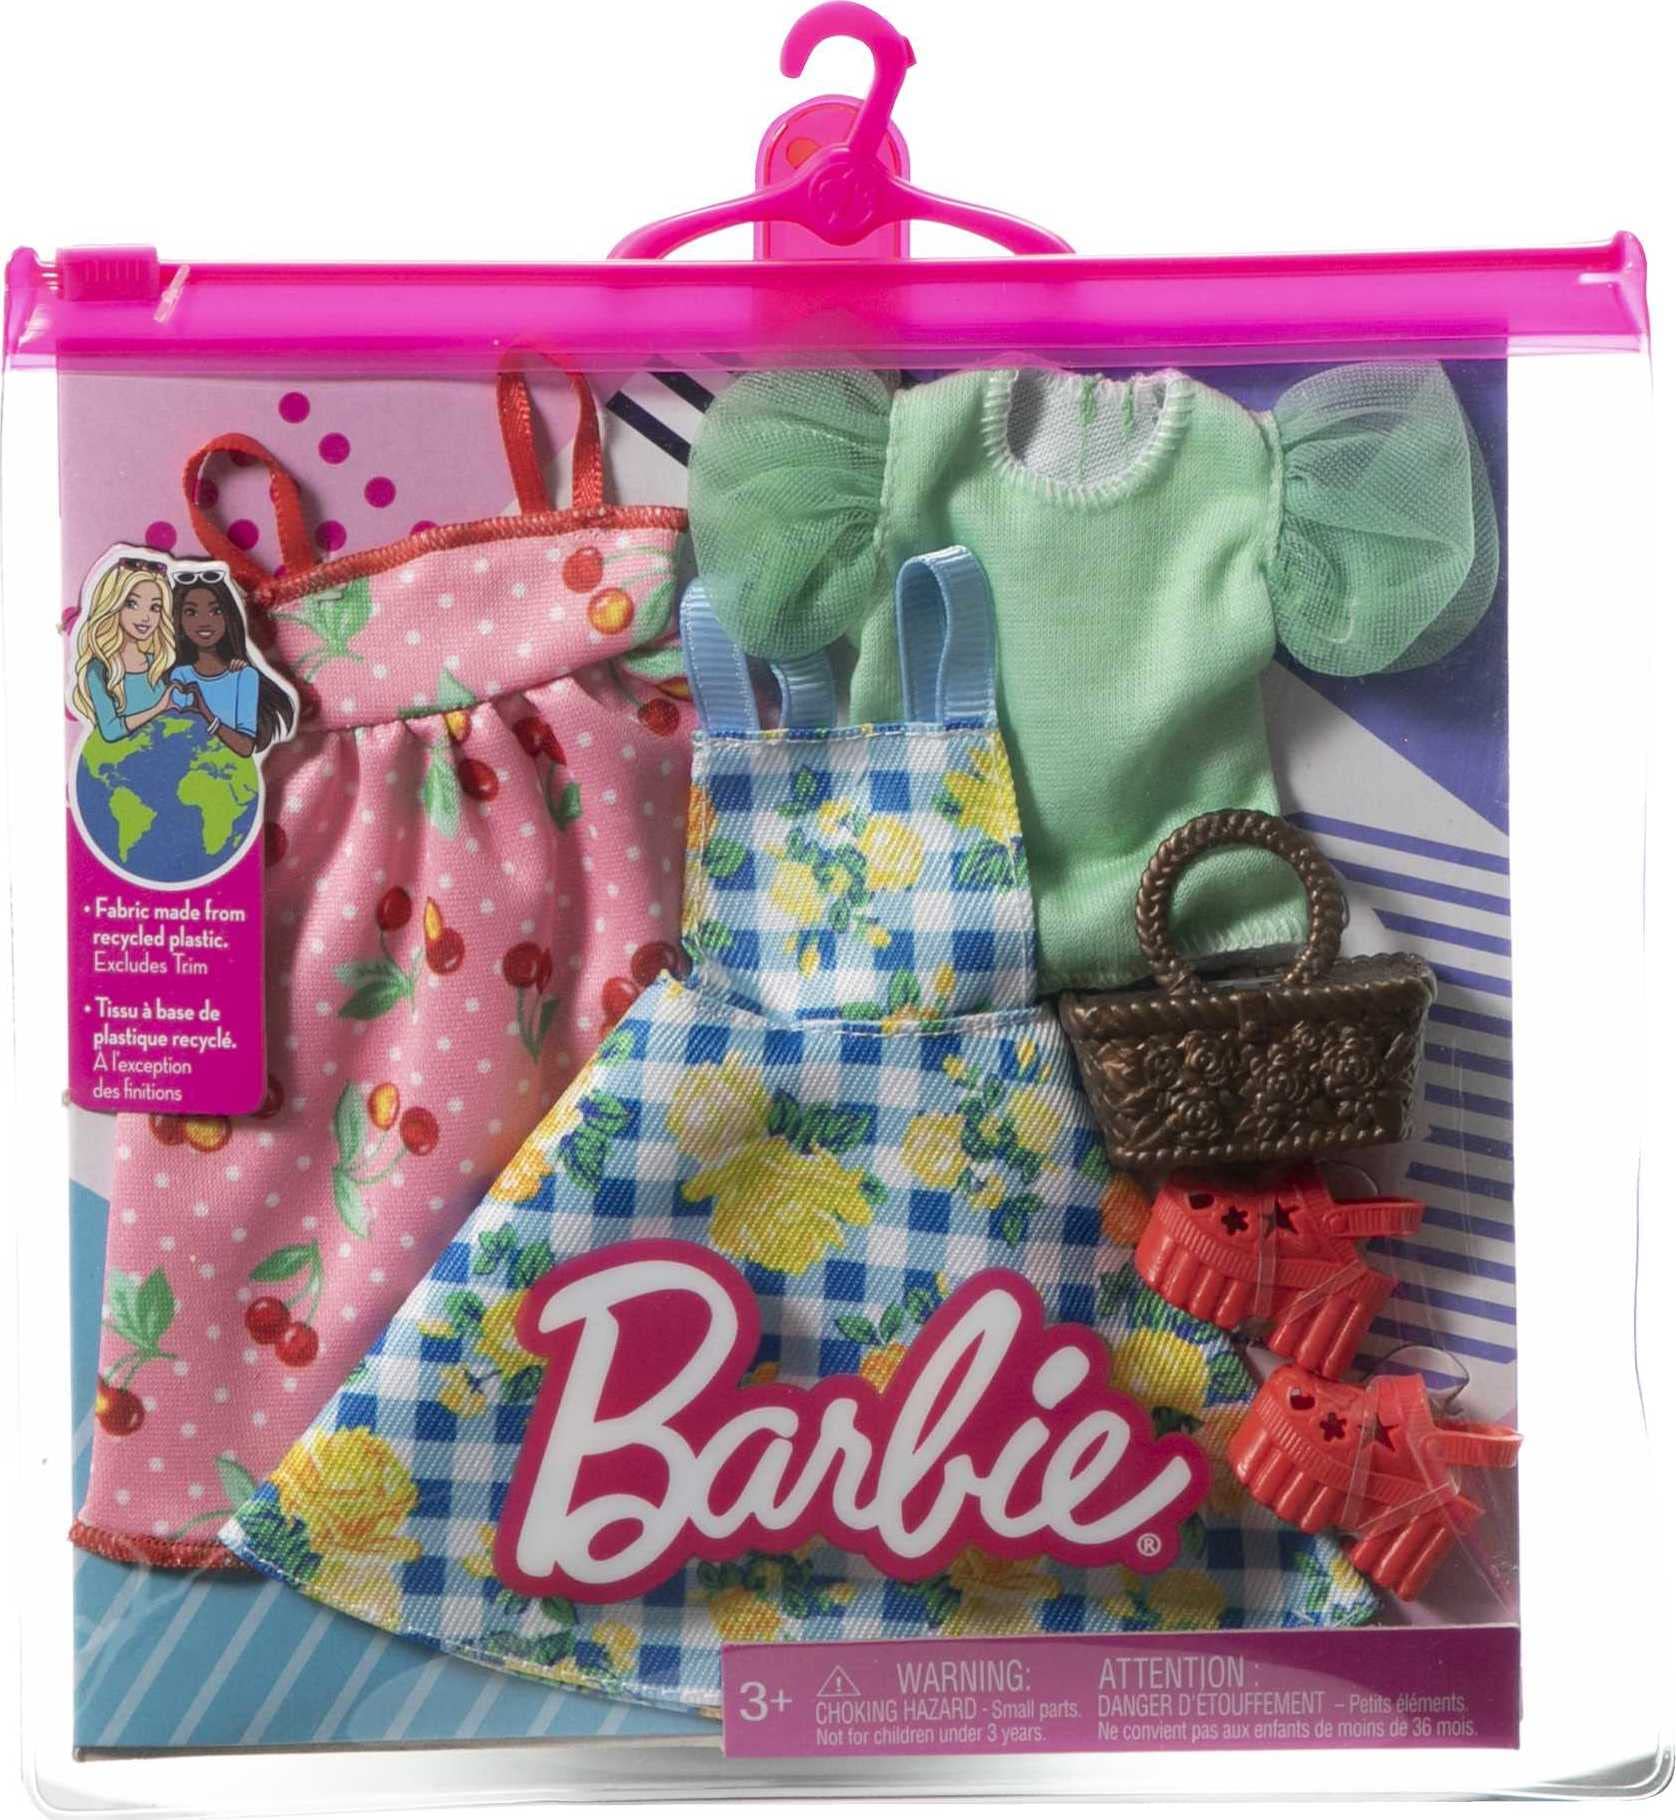 Barbie Fashions Doll Clothes and Accessories Set, 2 Picnic-Themed Dresses with Basket and Shoes for 2 Complete Outfits